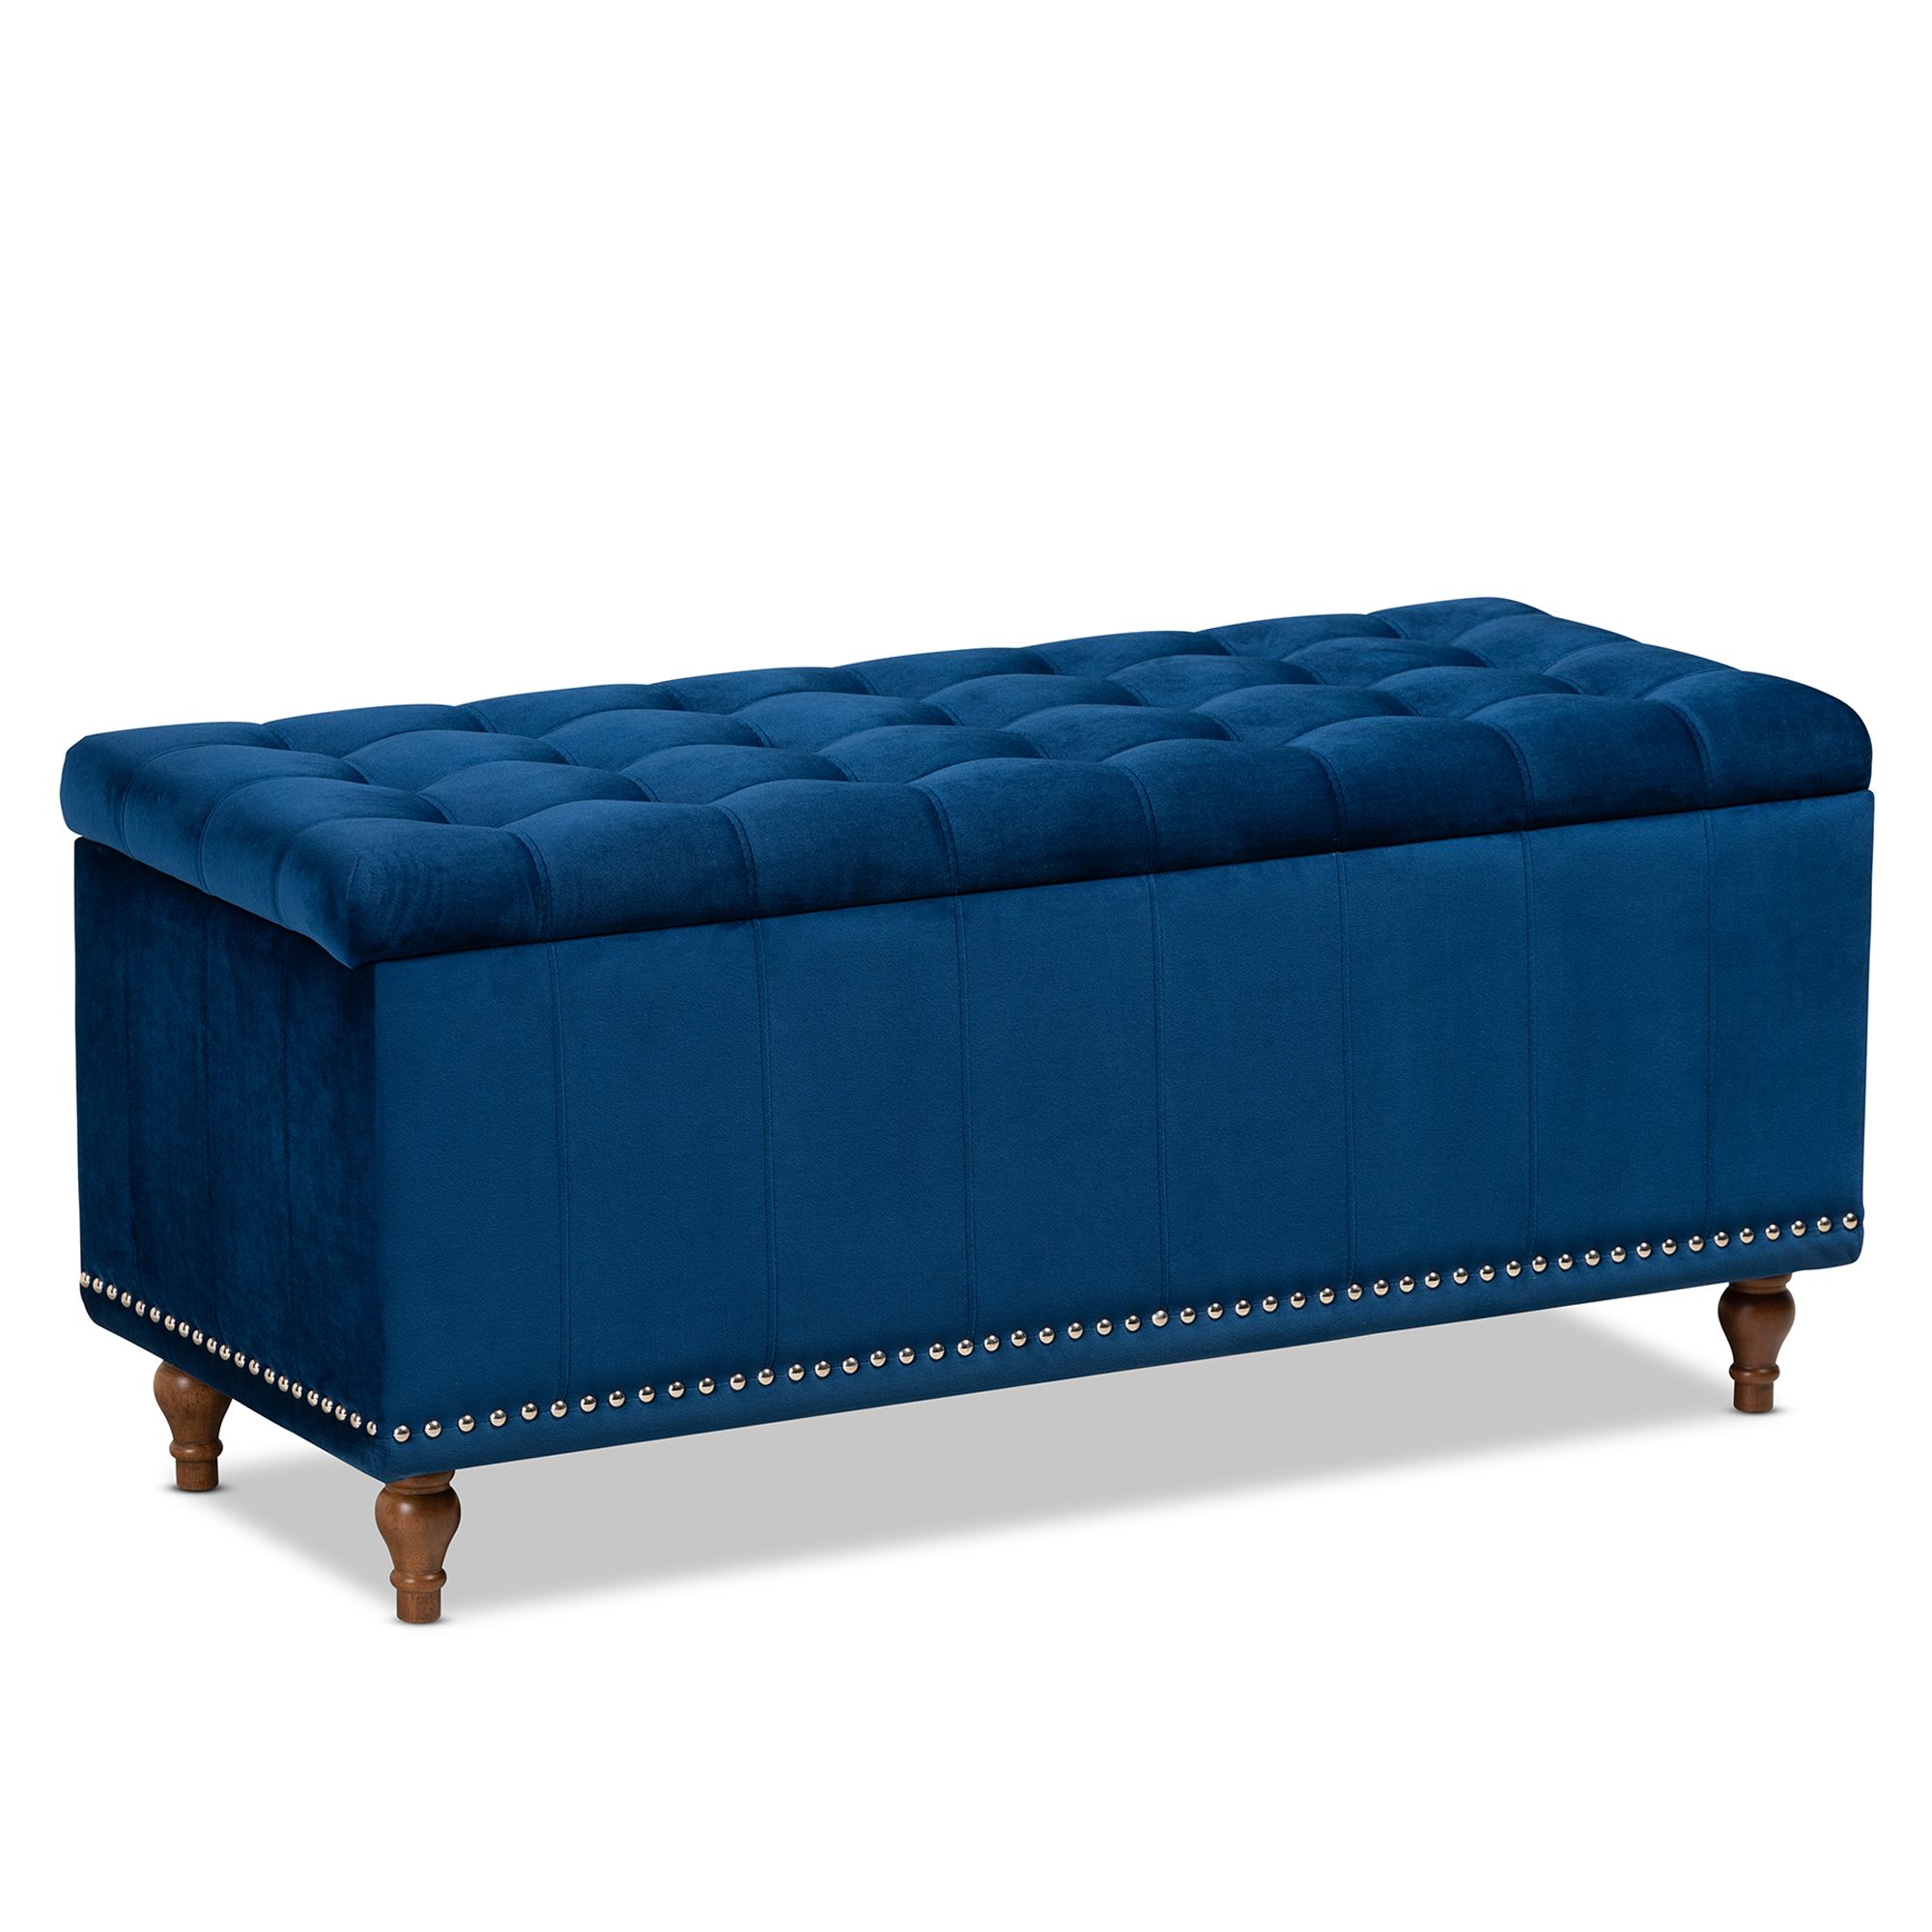 2017 Baxton Studio Kaylee Modern And Contemporary Navy Blue Velvet Fabric In Charcoal Fabric Tufted Storage Ottomans (View 2 of 10)